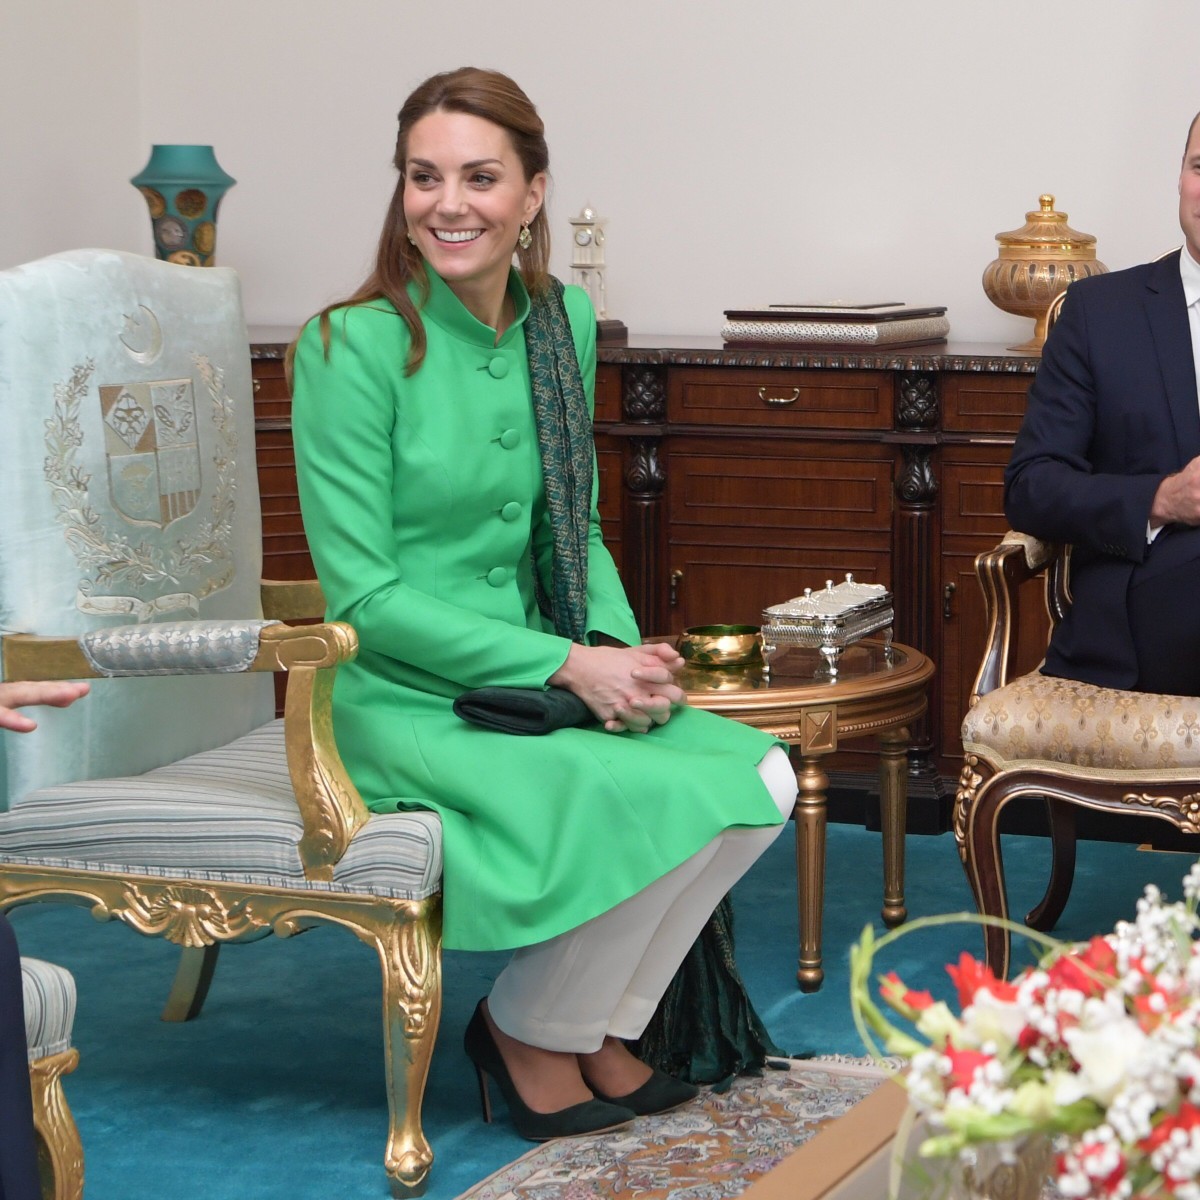 Kate Middleton looked elegant in a green and white outfit as the royal couple met Pakistan leader Imran Khan